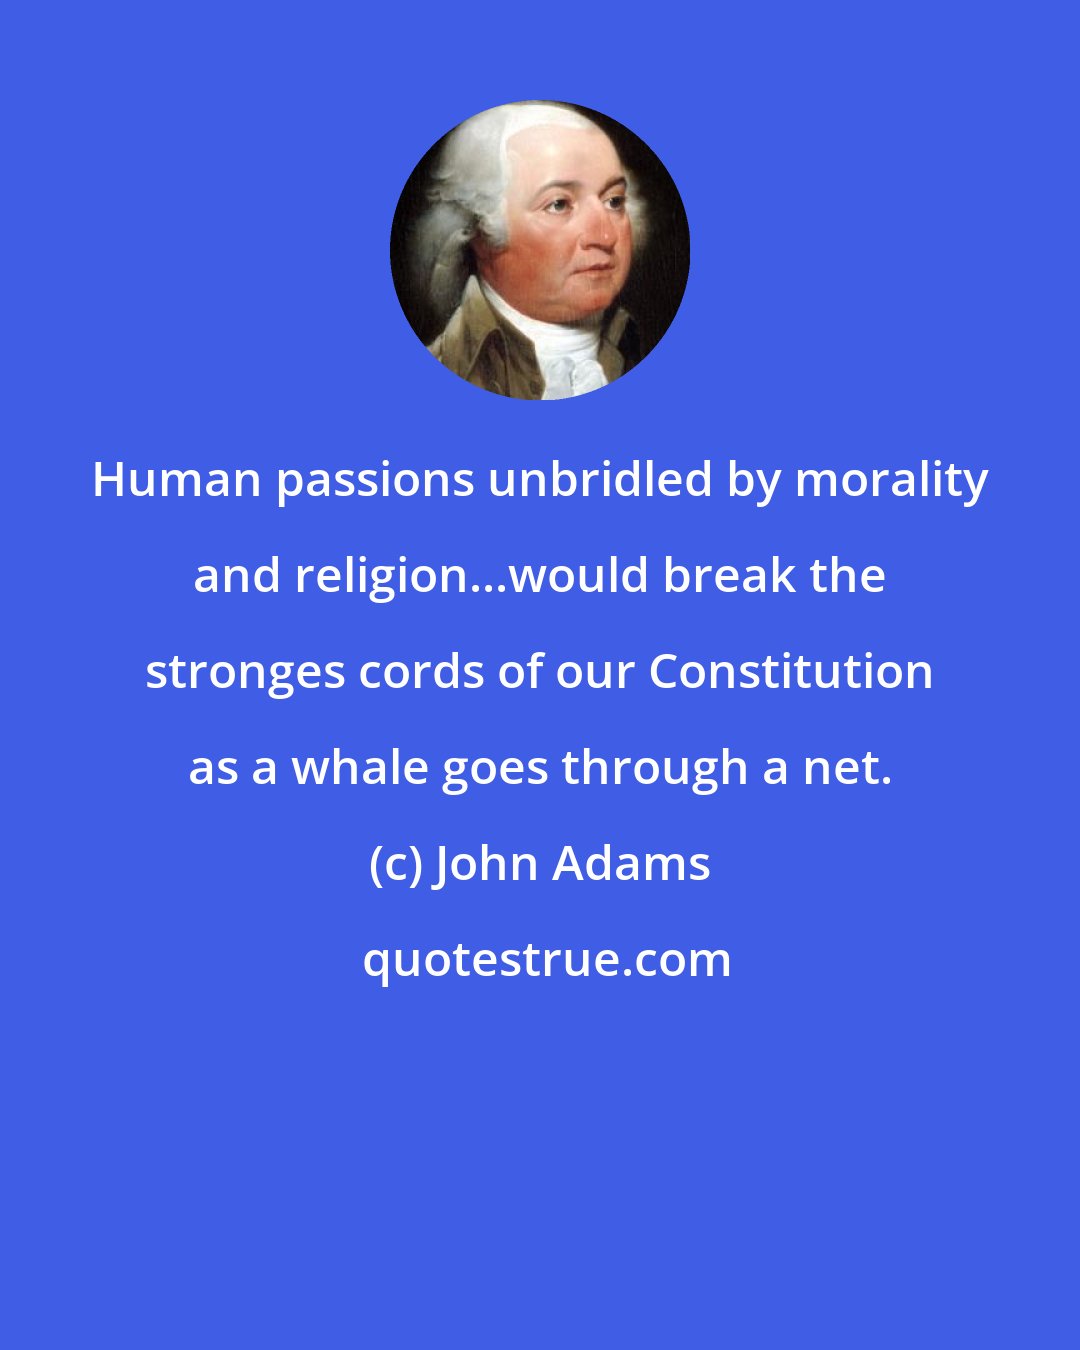 John Adams: Human passions unbridled by morality and religion...would break the stronges cords of our Constitution as a whale goes through a net.